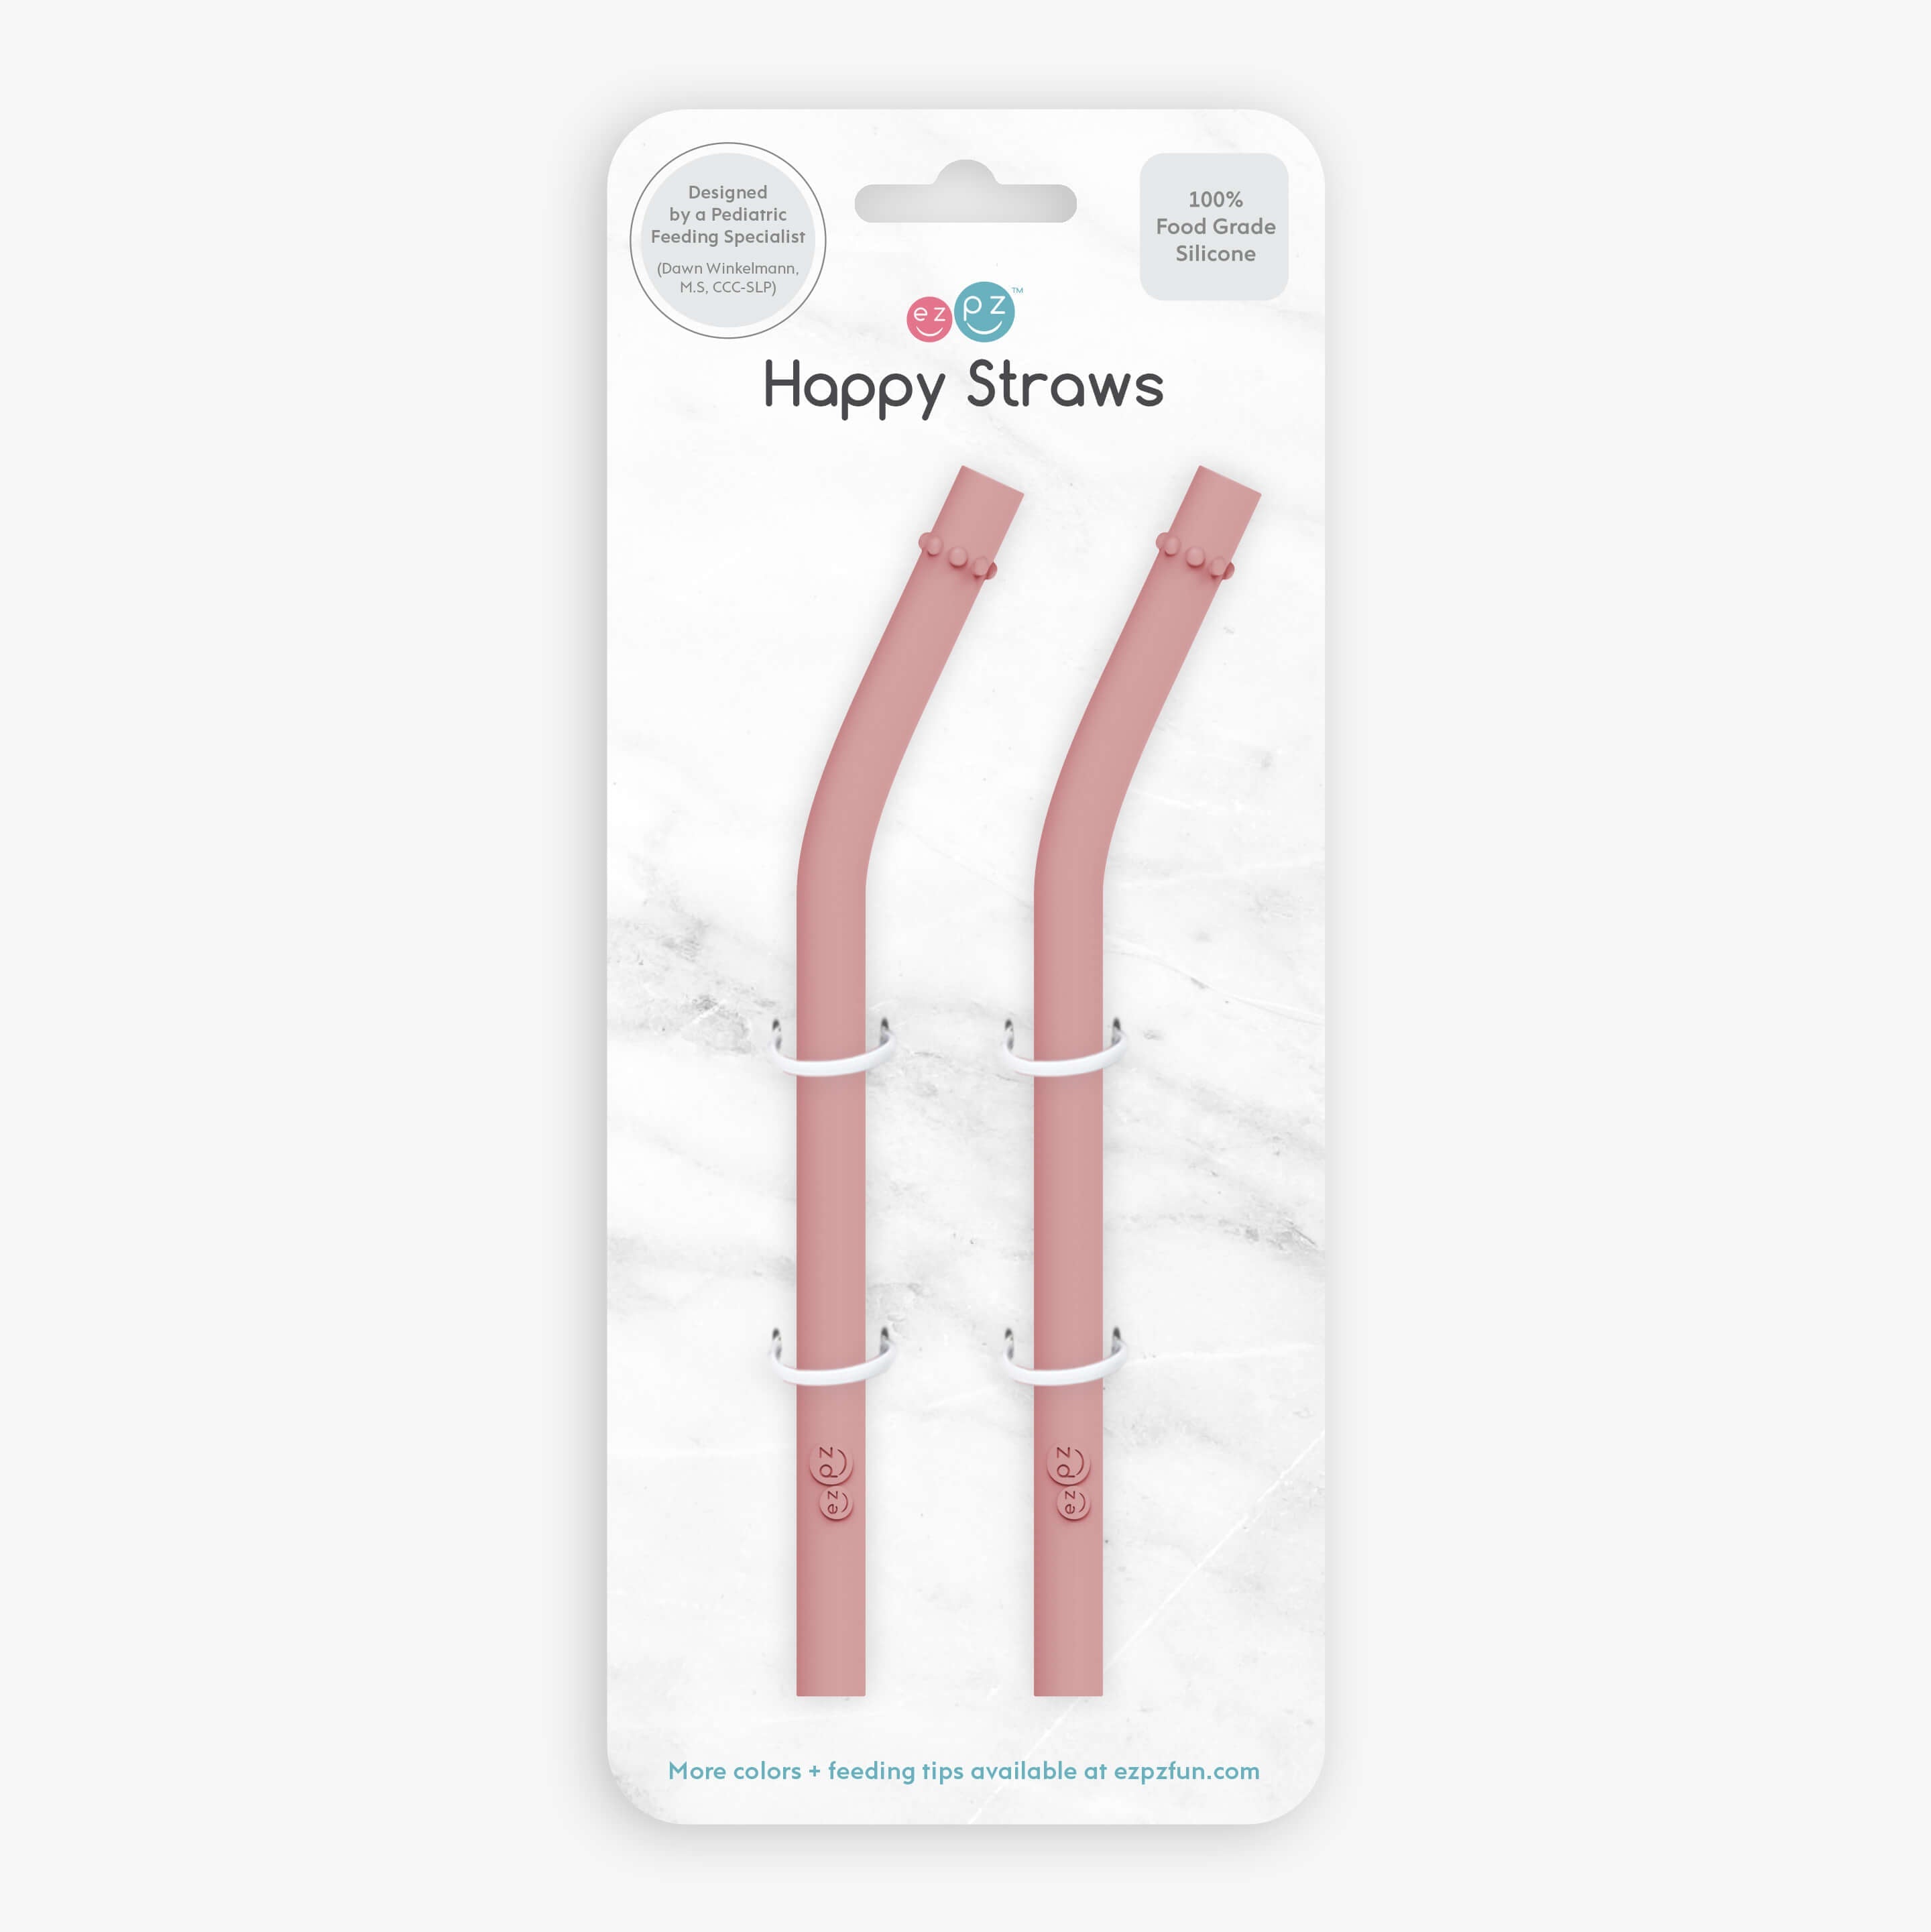 Straw Replacement Pack